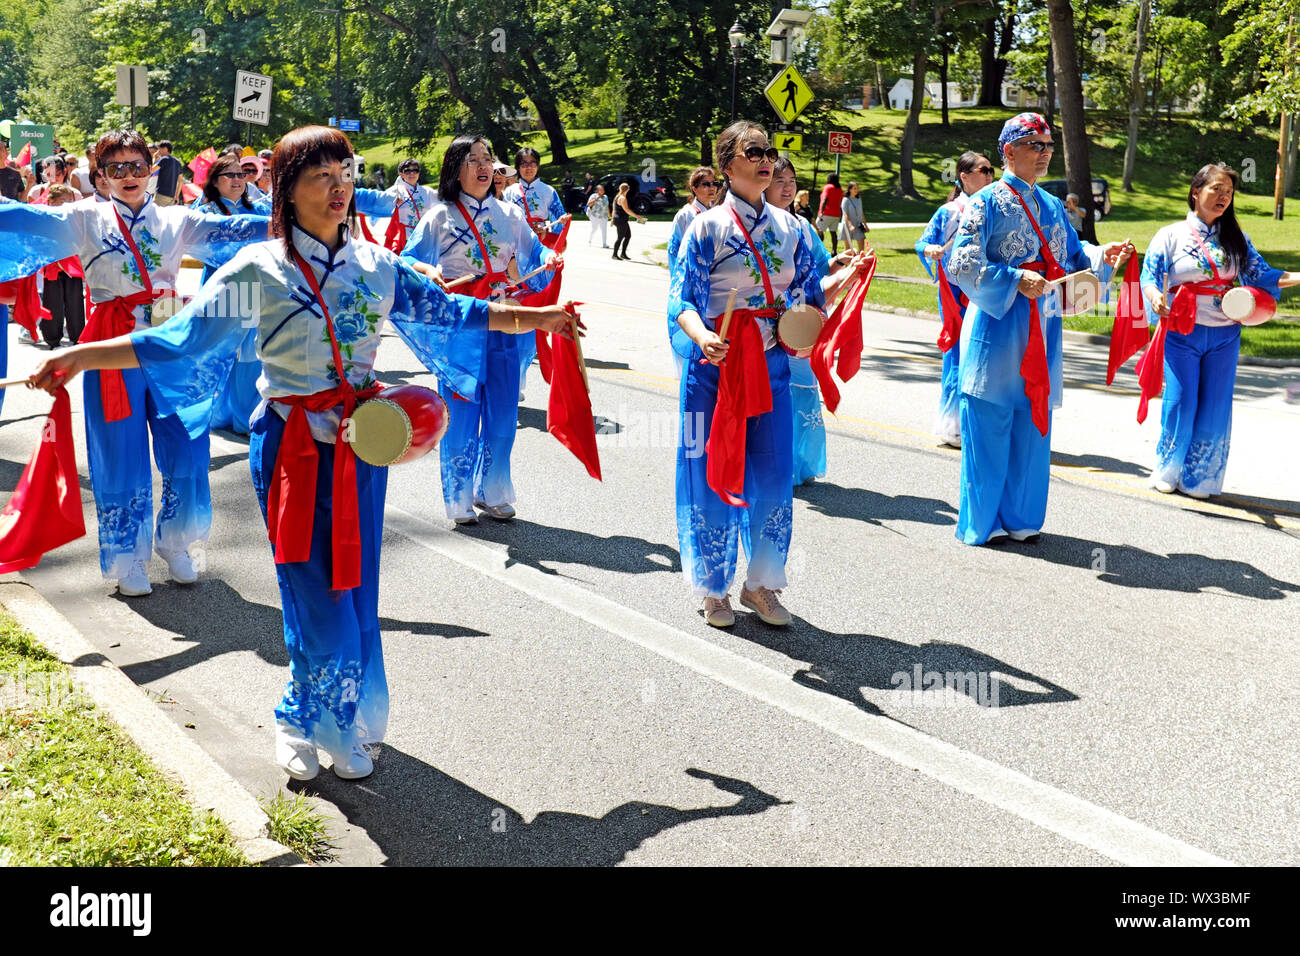 The Pittsburgh Xiaobo Chinese Waist Drum Dance Group performs in the 2019 One World Day celebration in the Cultural Gardens of Cleveland, Ohio, USA. Stock Photo